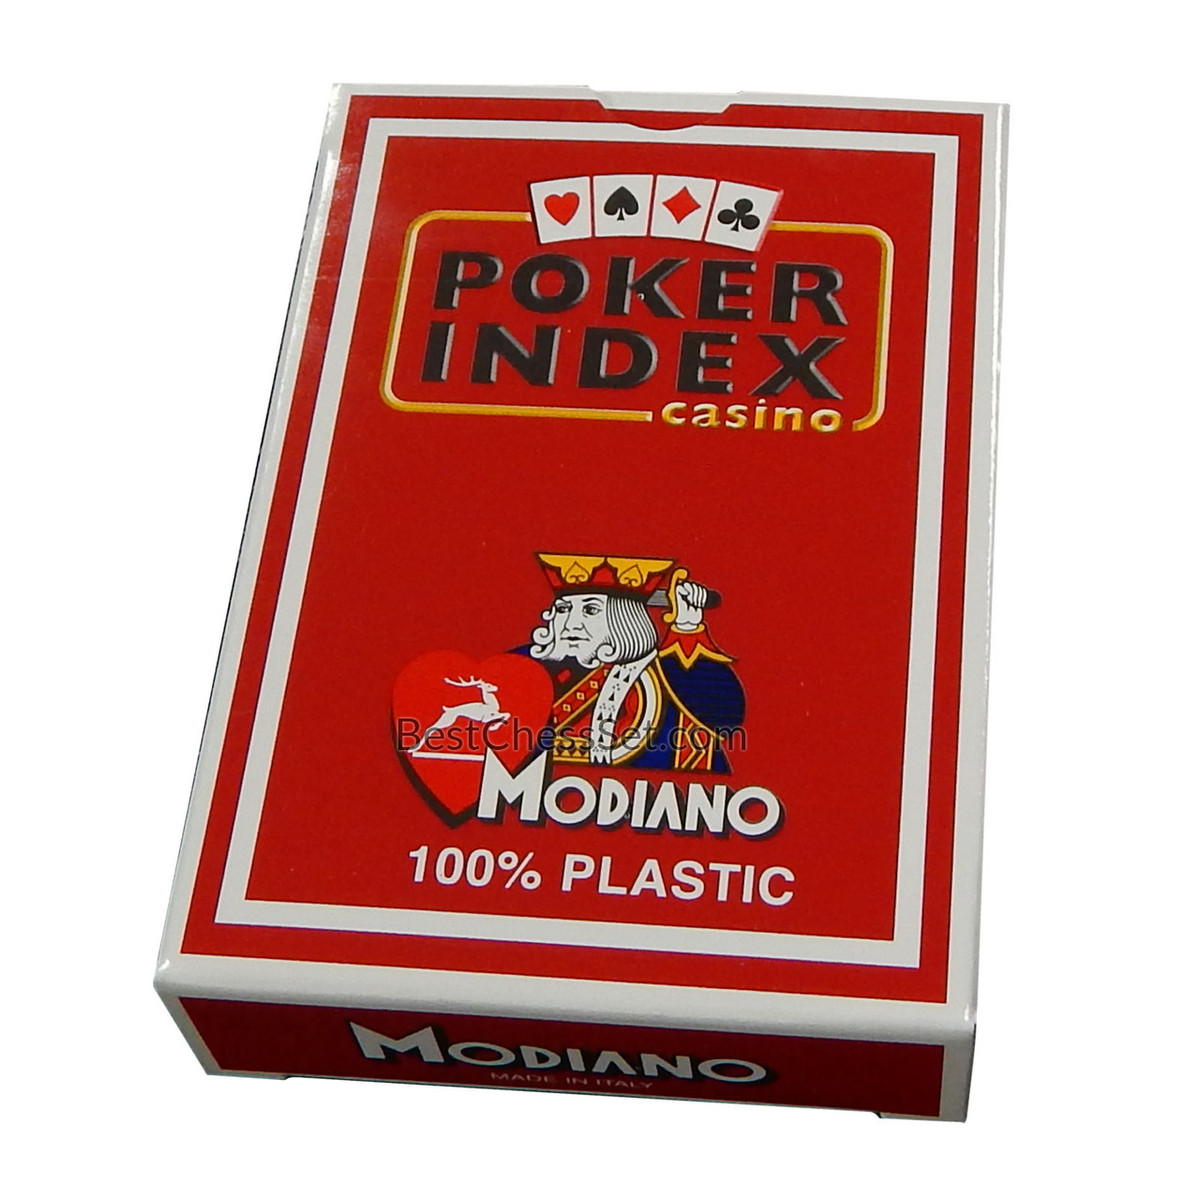 RED Golden Trophy 2 Index 100% Plastic Made in Italy Modiano Italian Poker Game Playing Cards Single Card Deck